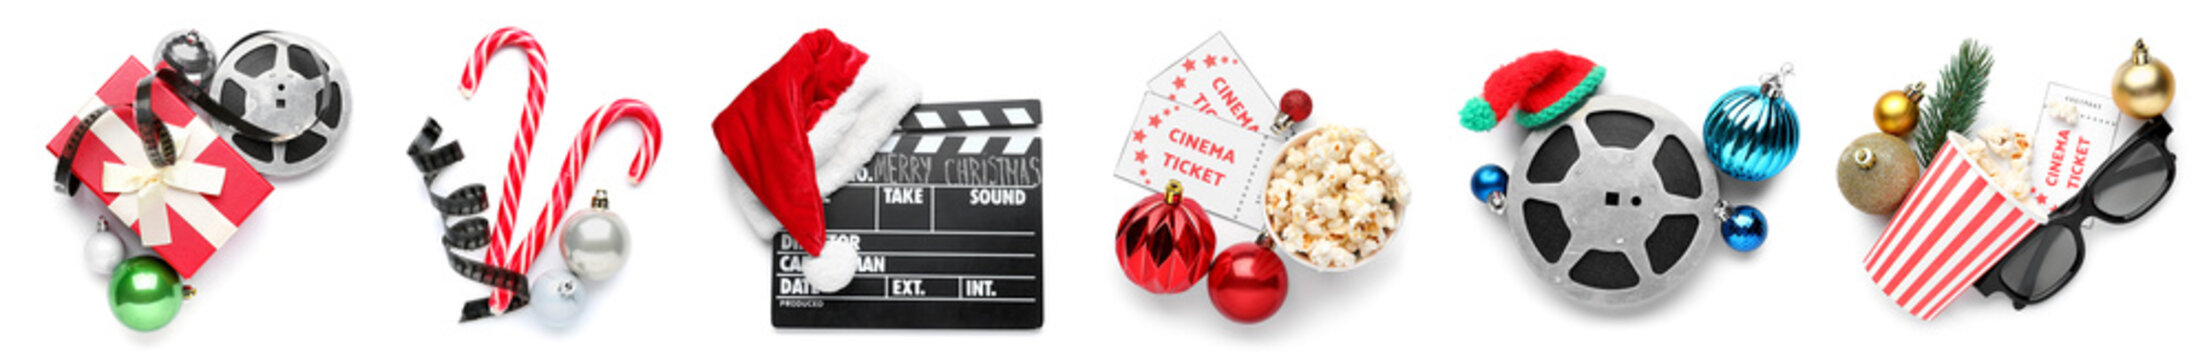 Collage of Christmas decorations with cinema tickets, movie clapper, popcorn and film reels on white background